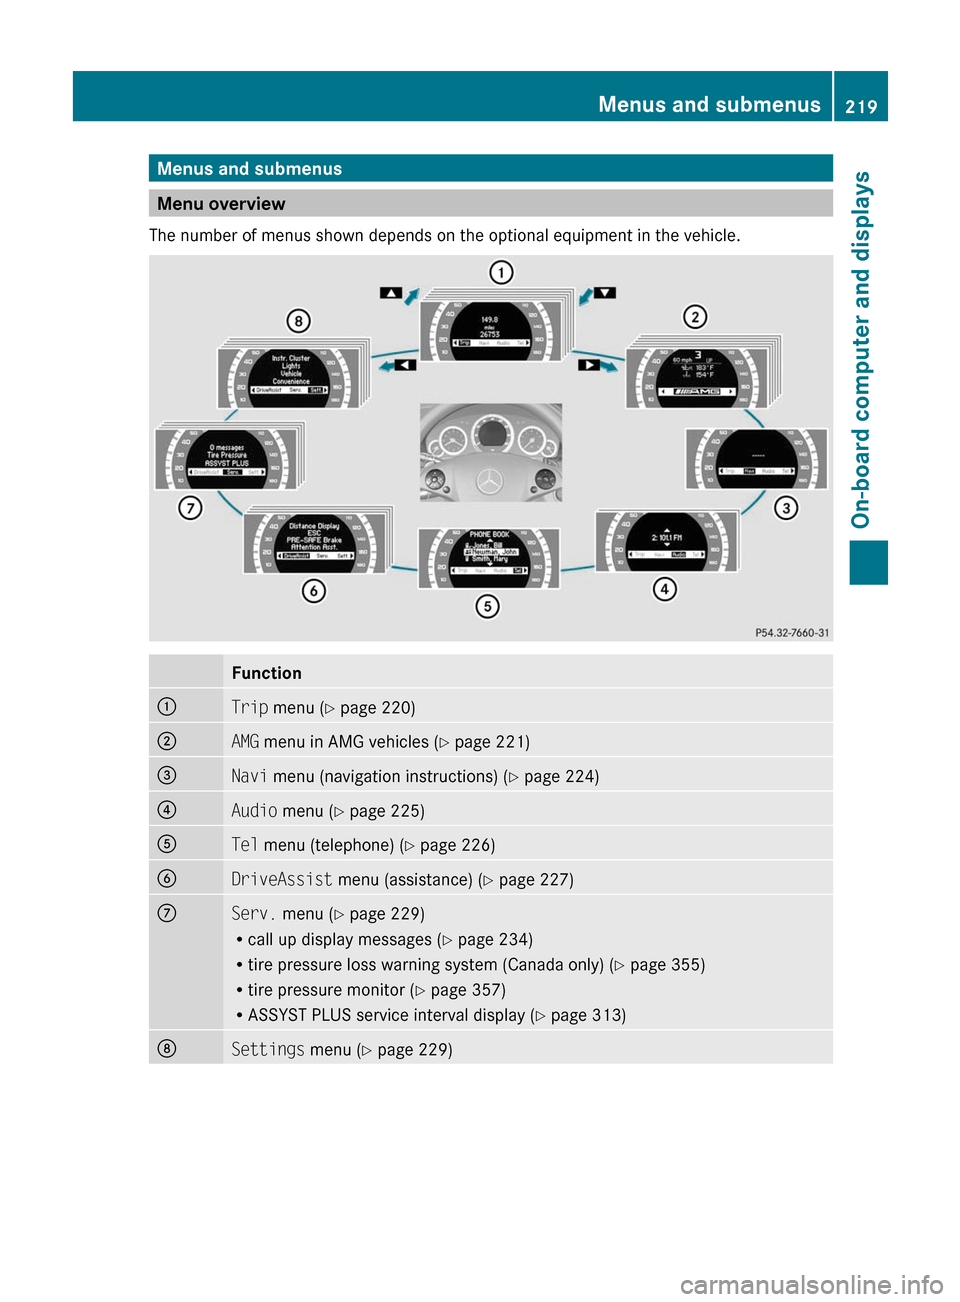 MERCEDES-BENZ E300 BLUETEC 2011 W212 Owners Manual Menus and submenus
Menu overview
The number of menus shown depends on the optional equipment in the vehicle. 
Function:Trip  menu ( Y page 220);AMG  menu in AMG vehicles ( Y page 221)=Navi  menu (navi